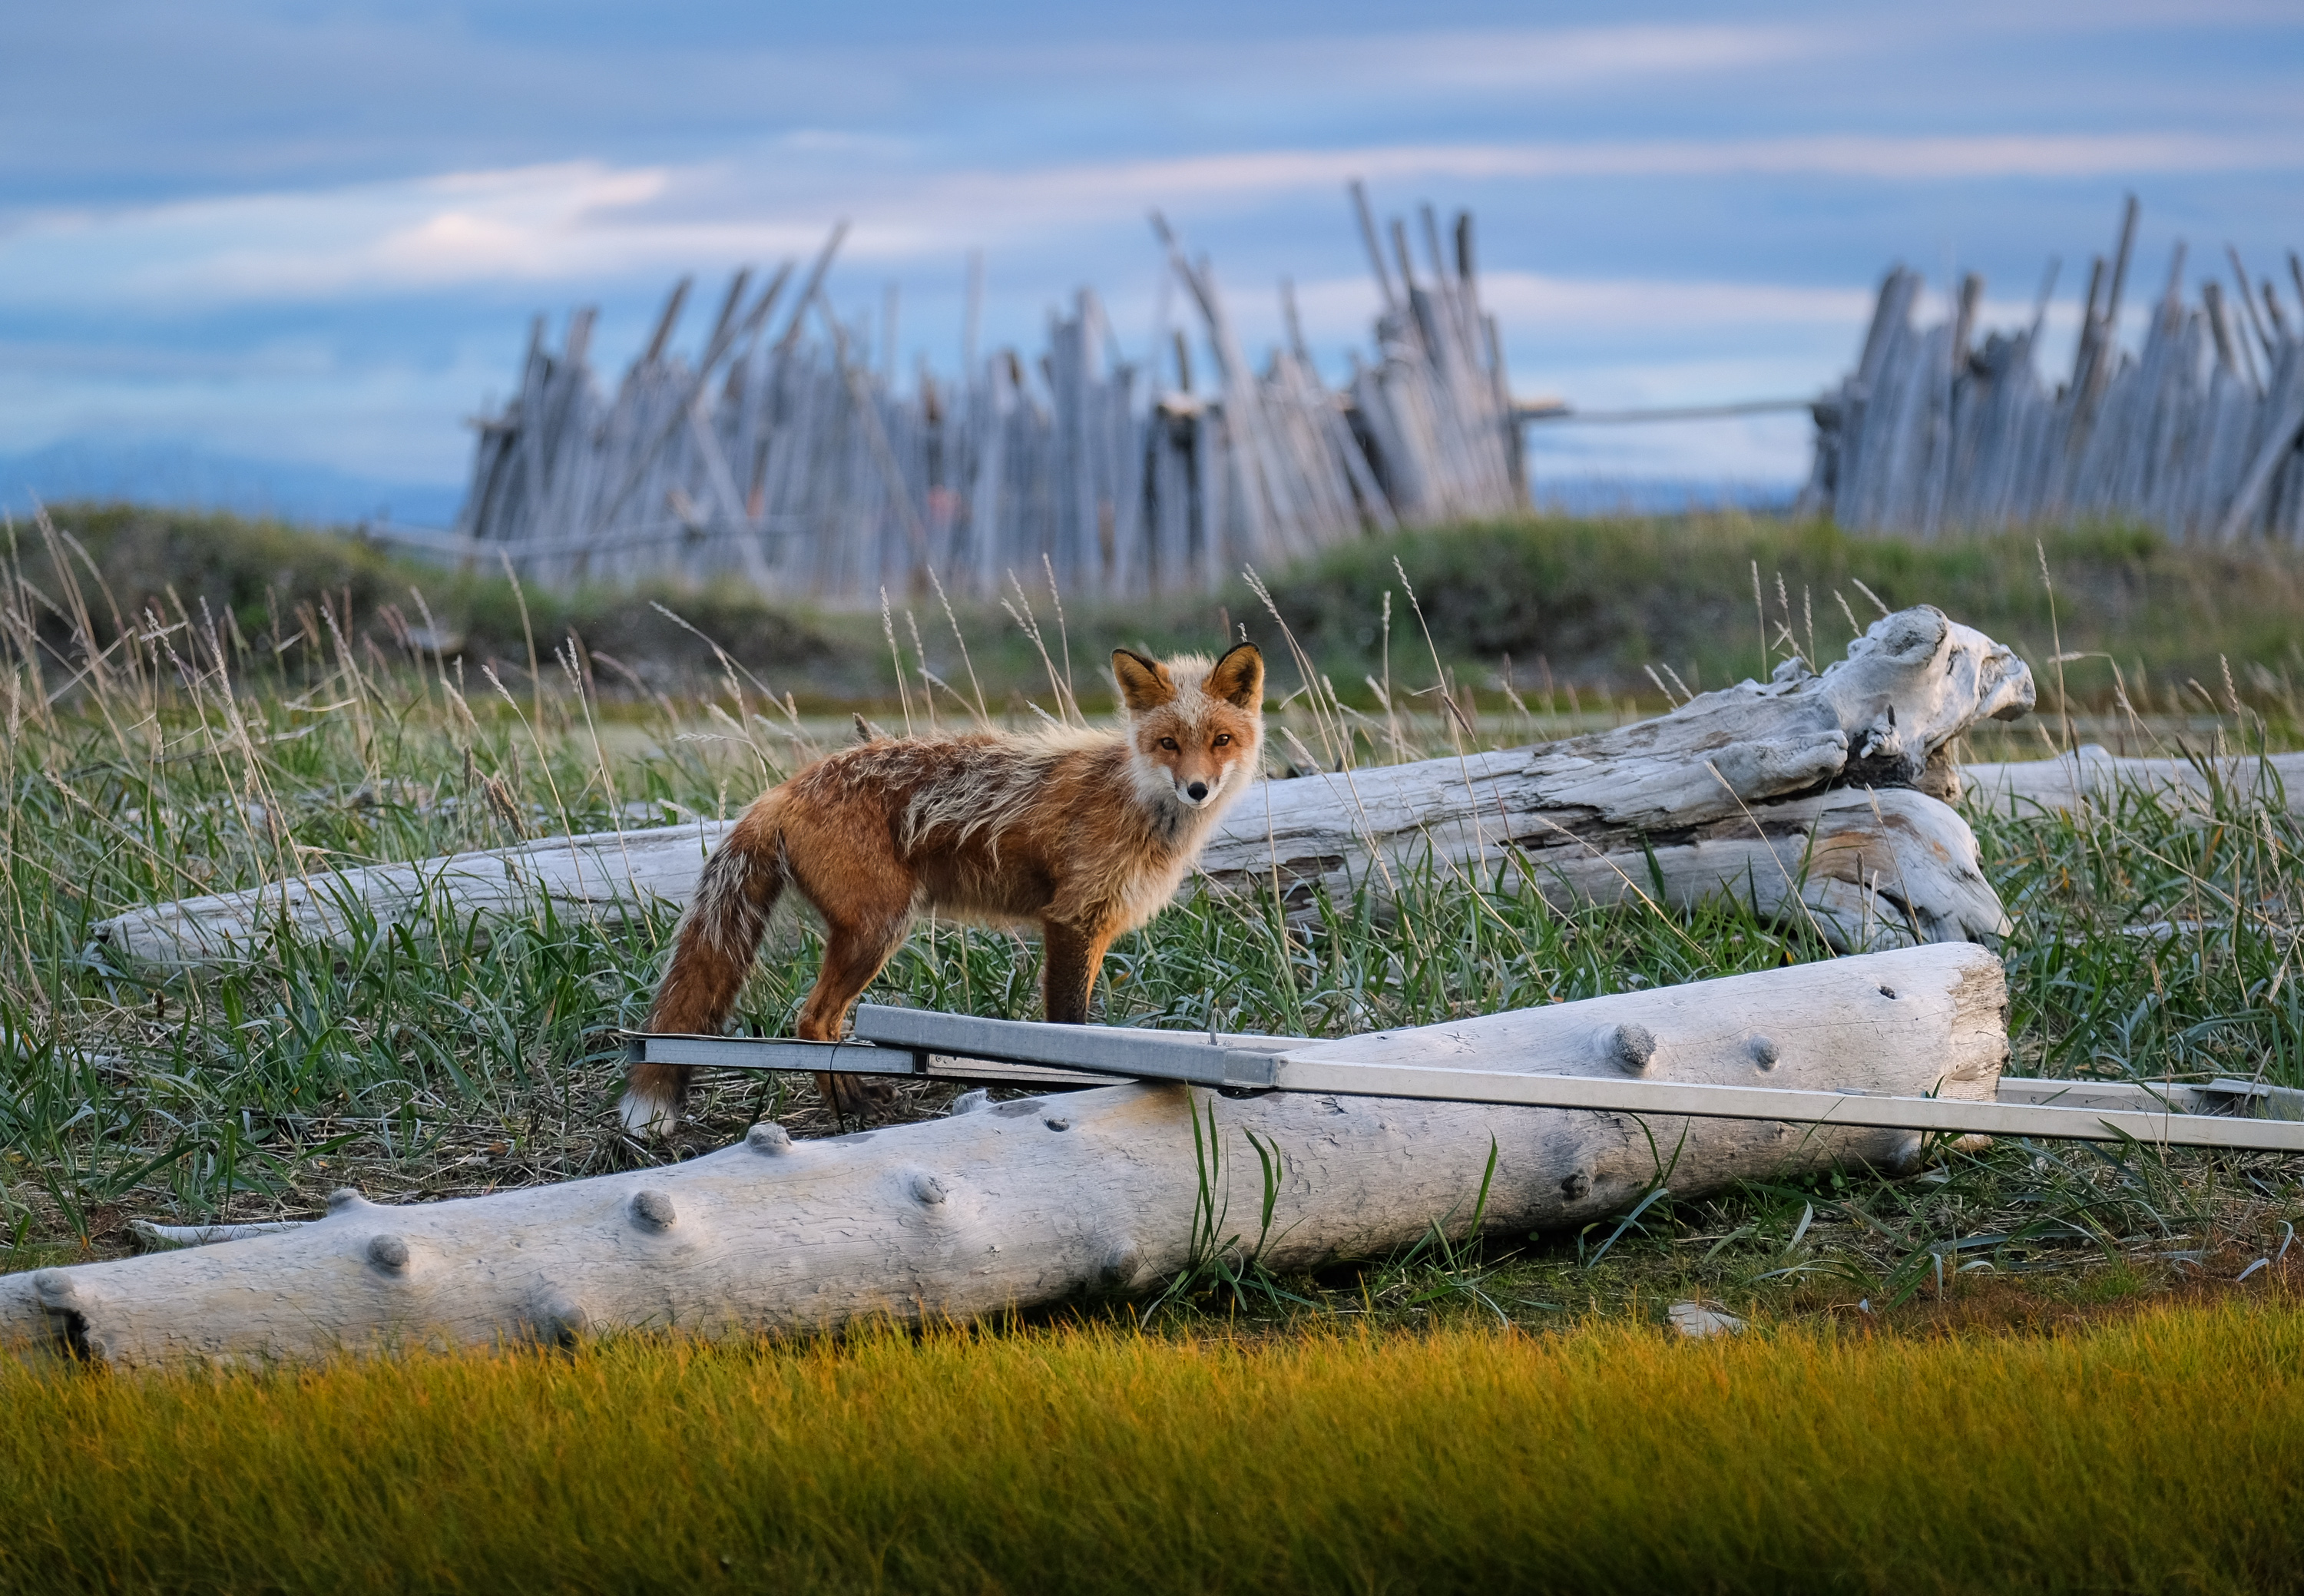 Ecological resources on the island, a fox standing in front of the camping shelters. Photo source: Sandra Angers-Blondin, https://www.vanishingislandphoto.comhttps://www.instagram.com/sandra.angers.b/